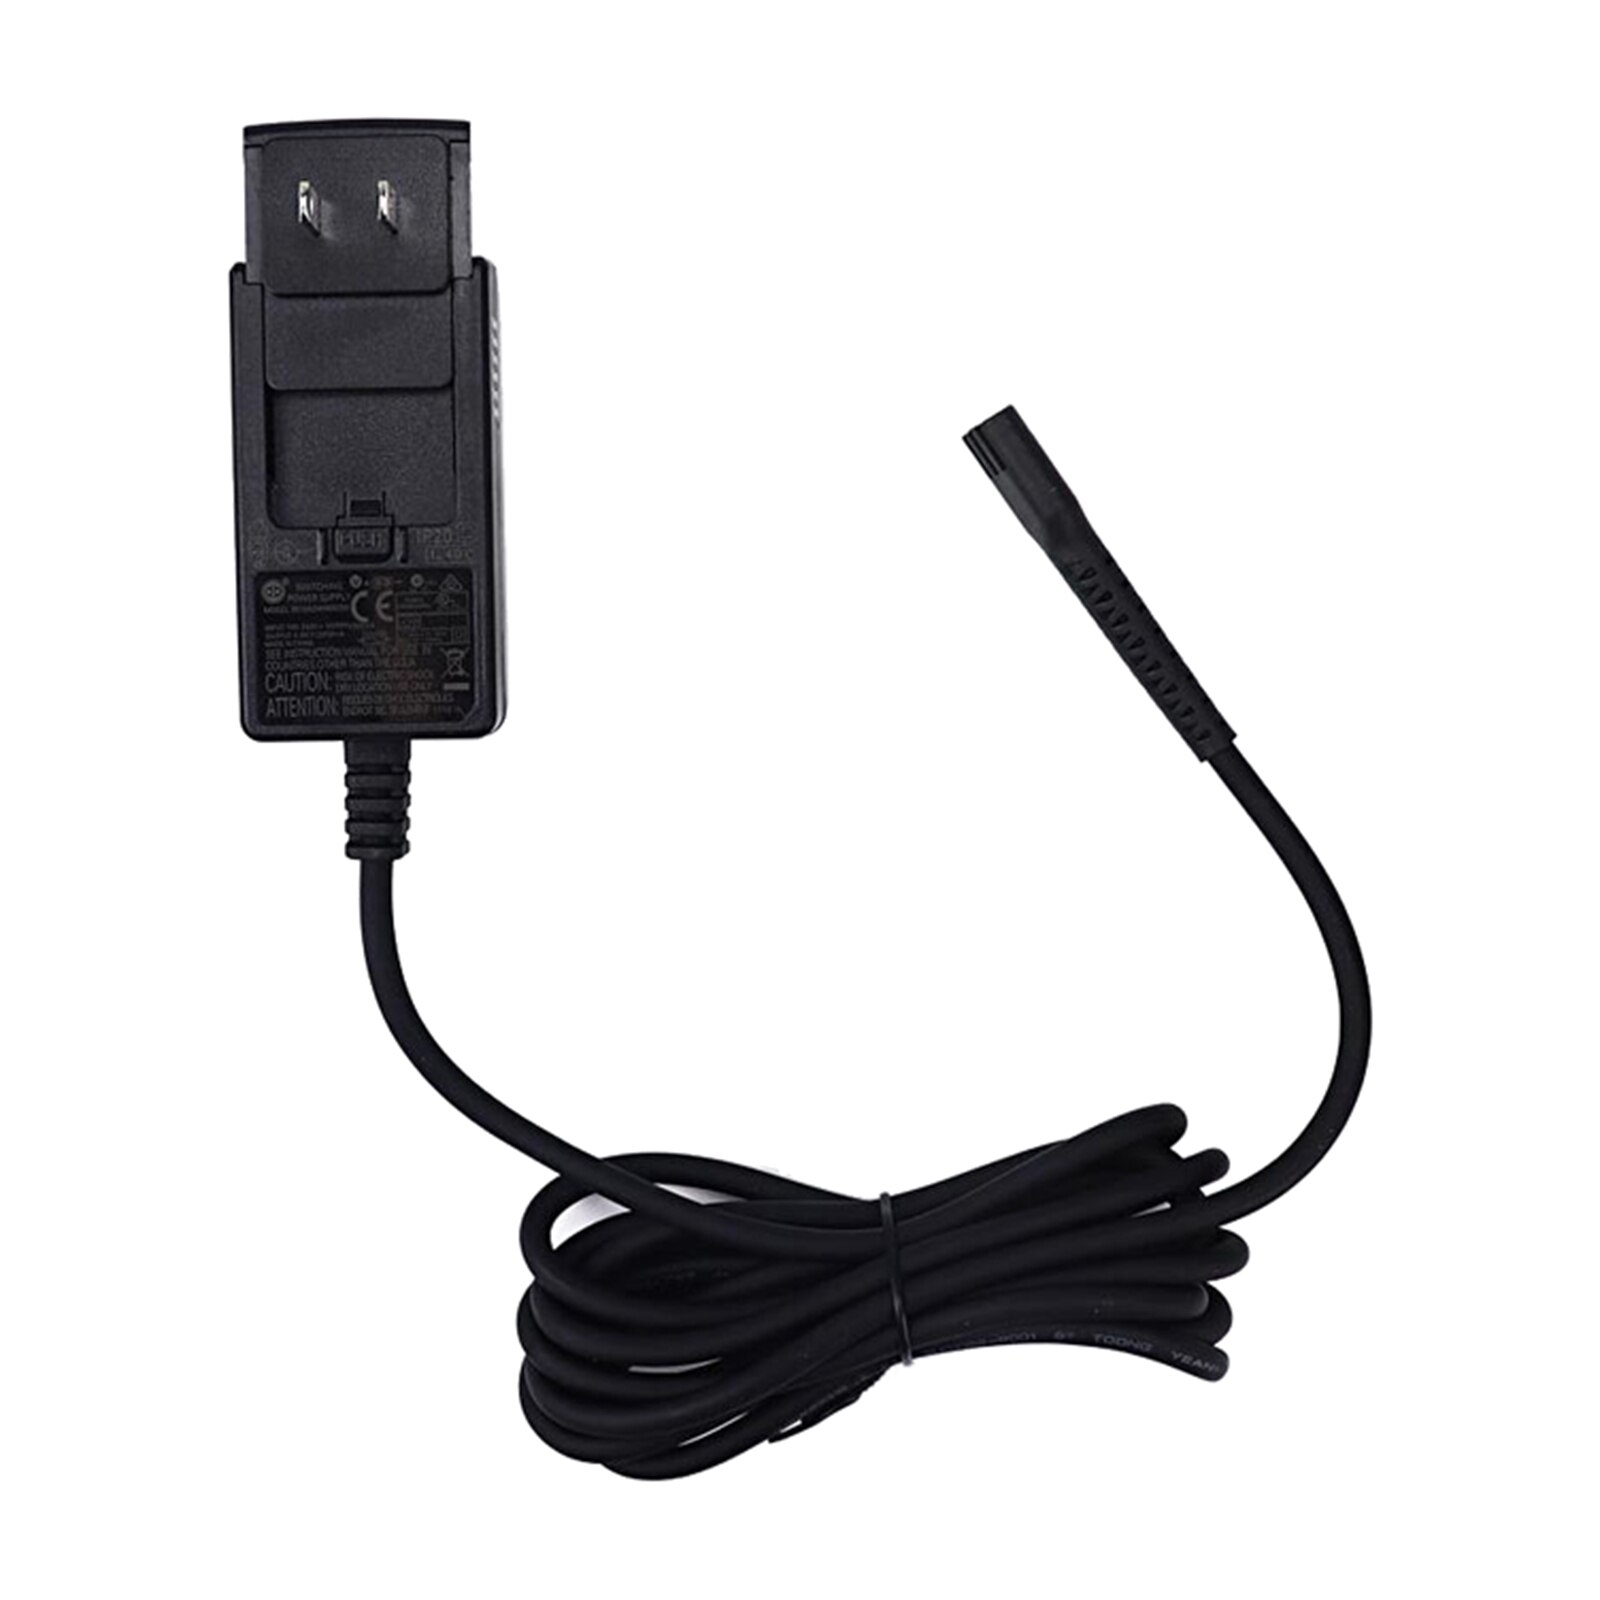 Ac Adapter Oplader Voor Wahl 8591 8148 Trimmer Voeding Cord Us Plug